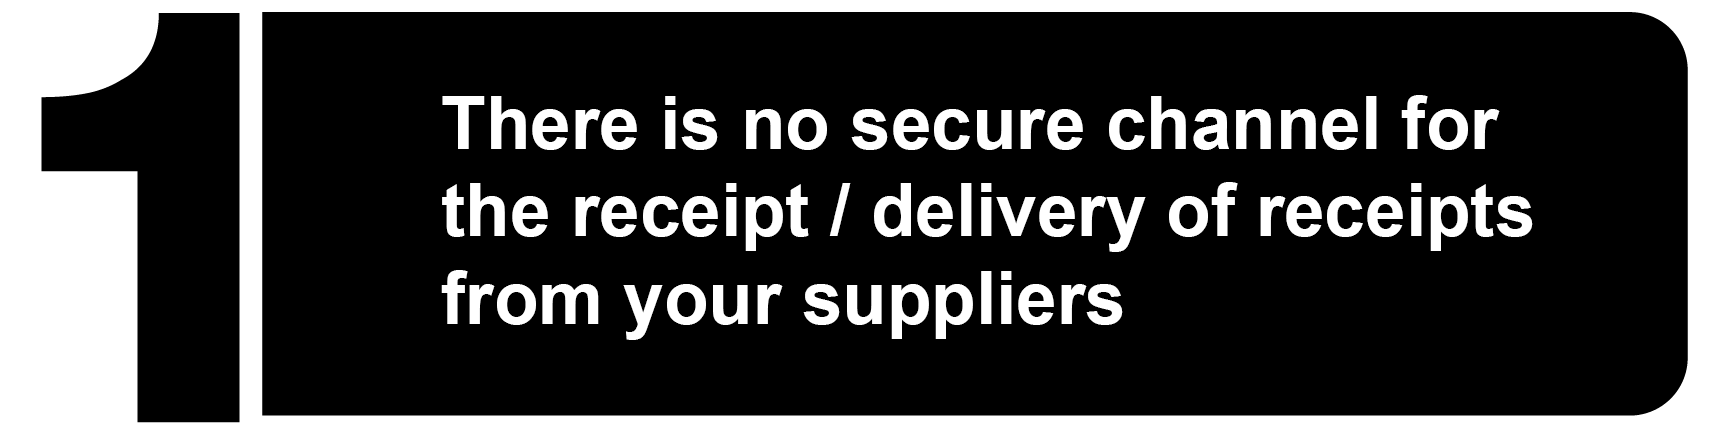 There is no secure channel for the receipt / delivery of receipts from your suppliers